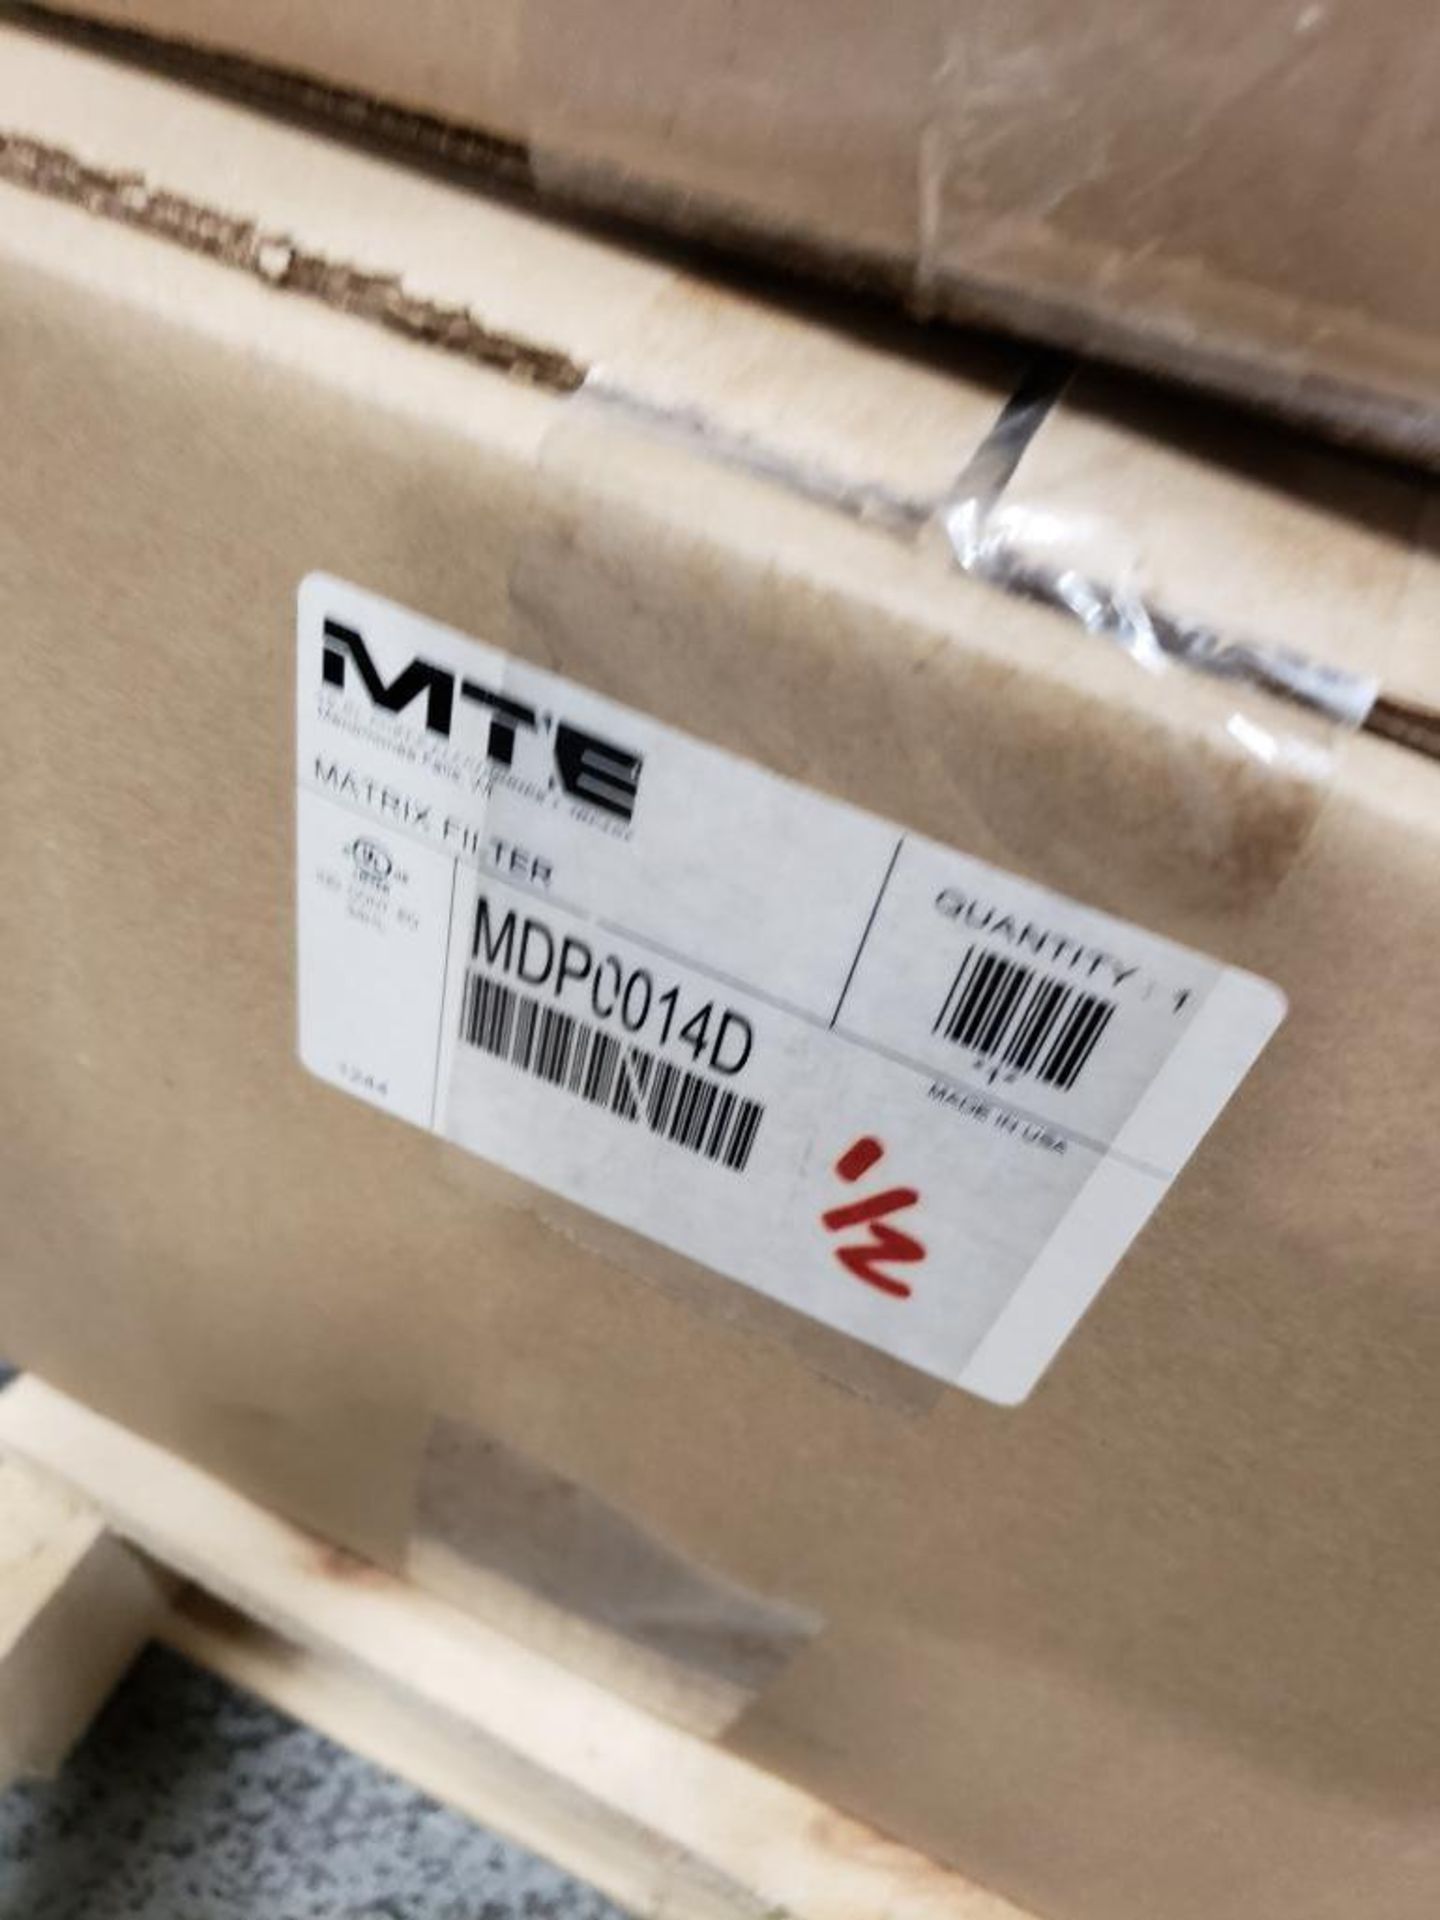 Qty 2 - MTE matrix filter model MDP0014D. New in boxes. - Image 8 of 8